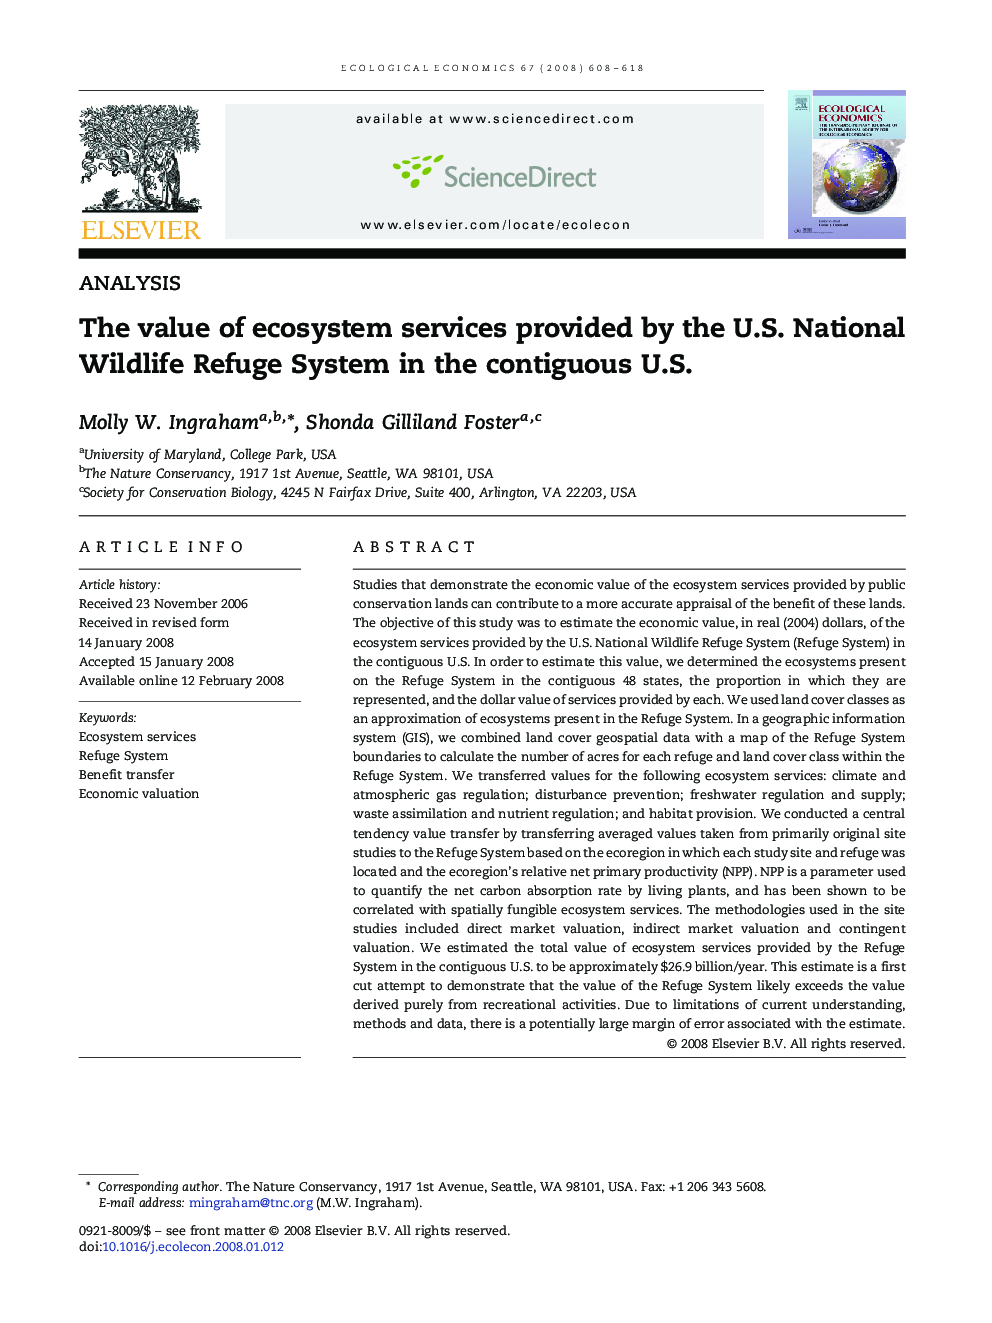 The value of ecosystem services provided by the U.S. National Wildlife Refuge System in the contiguous U.S.